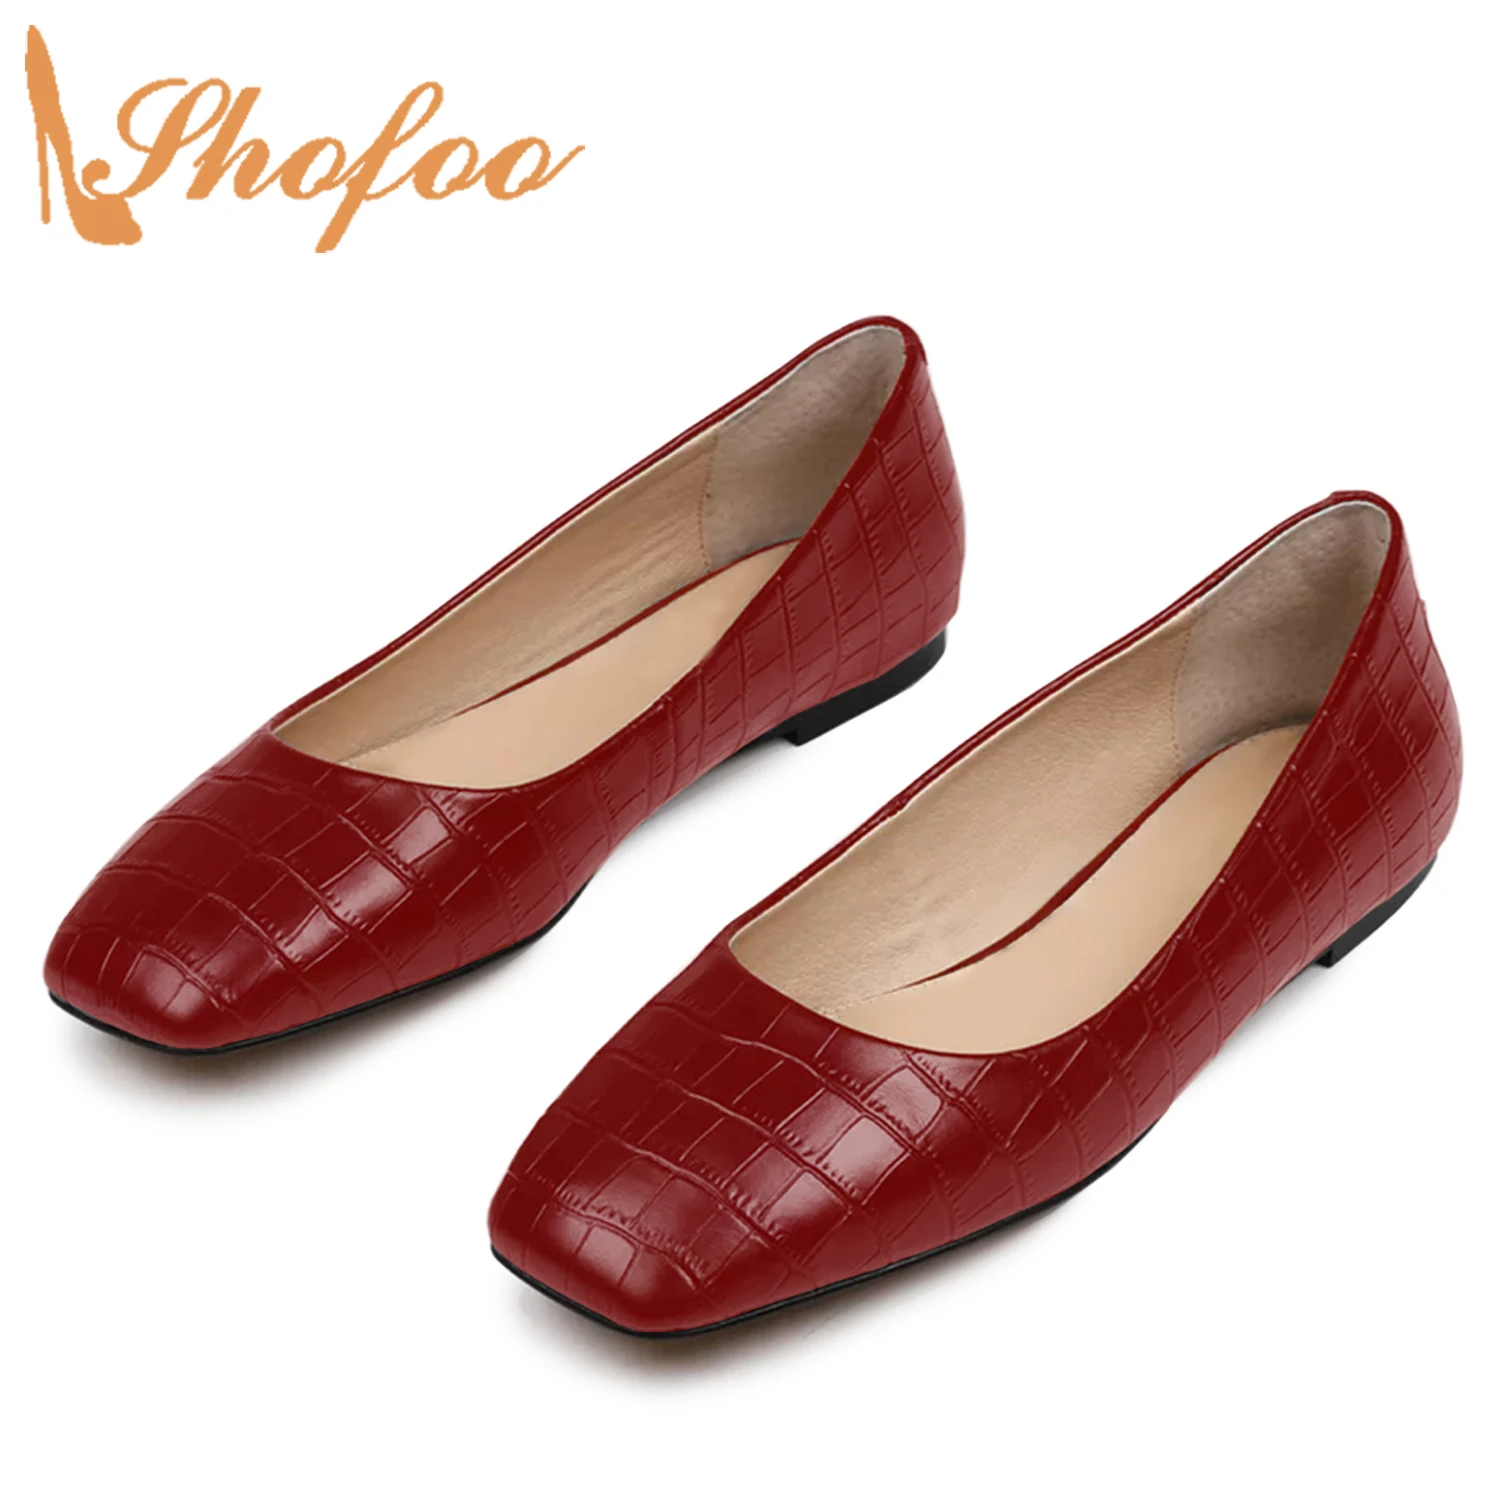 

Red Crocodile Embossed Women's Ballet Flats Low Heels Square Toe Leather Ladies Casual Slip On Large Size 13 14 Shoes Shofoo